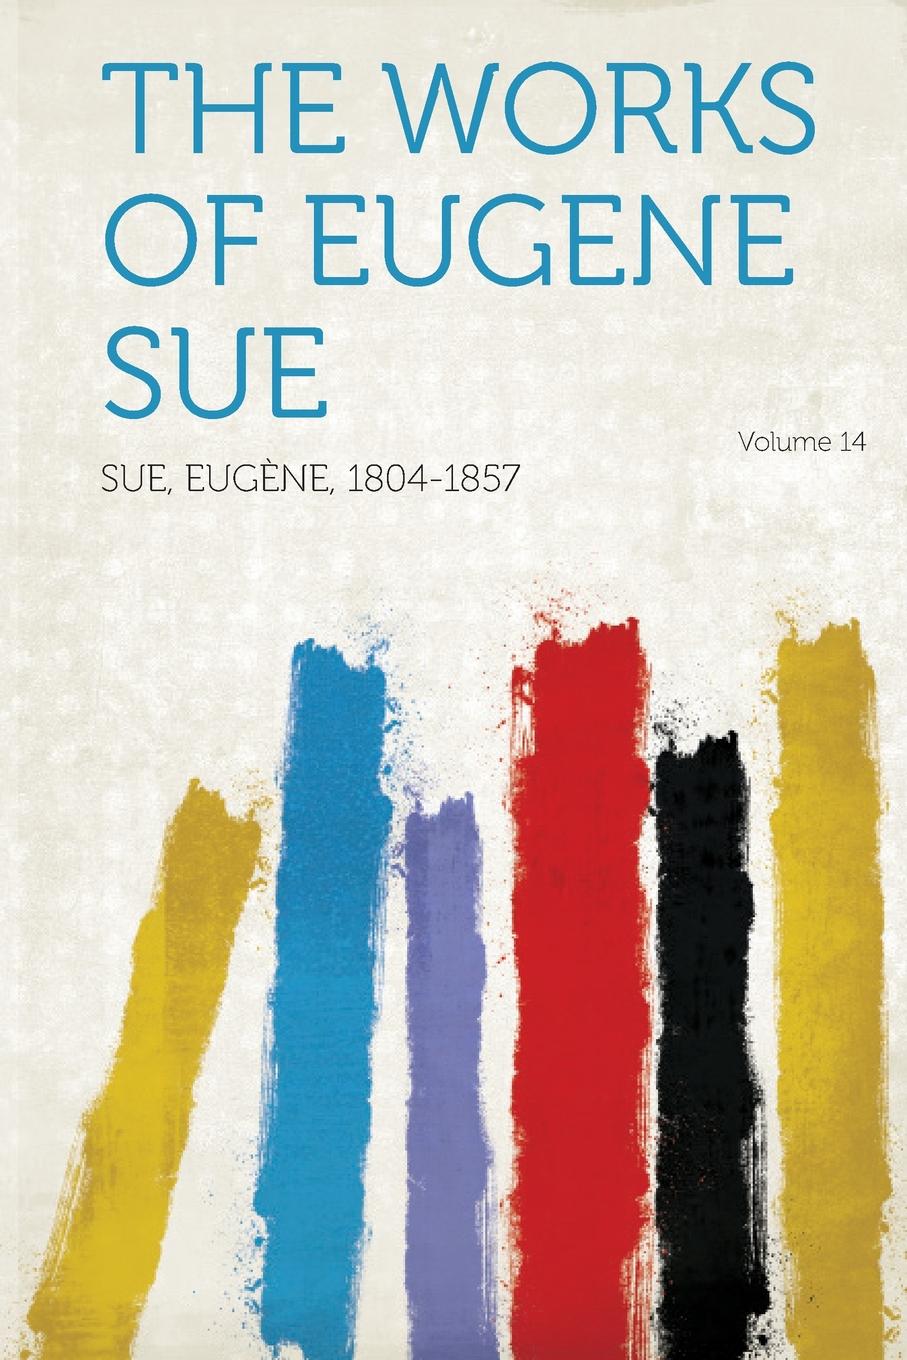 The Works of Eugene Sue Volume 14